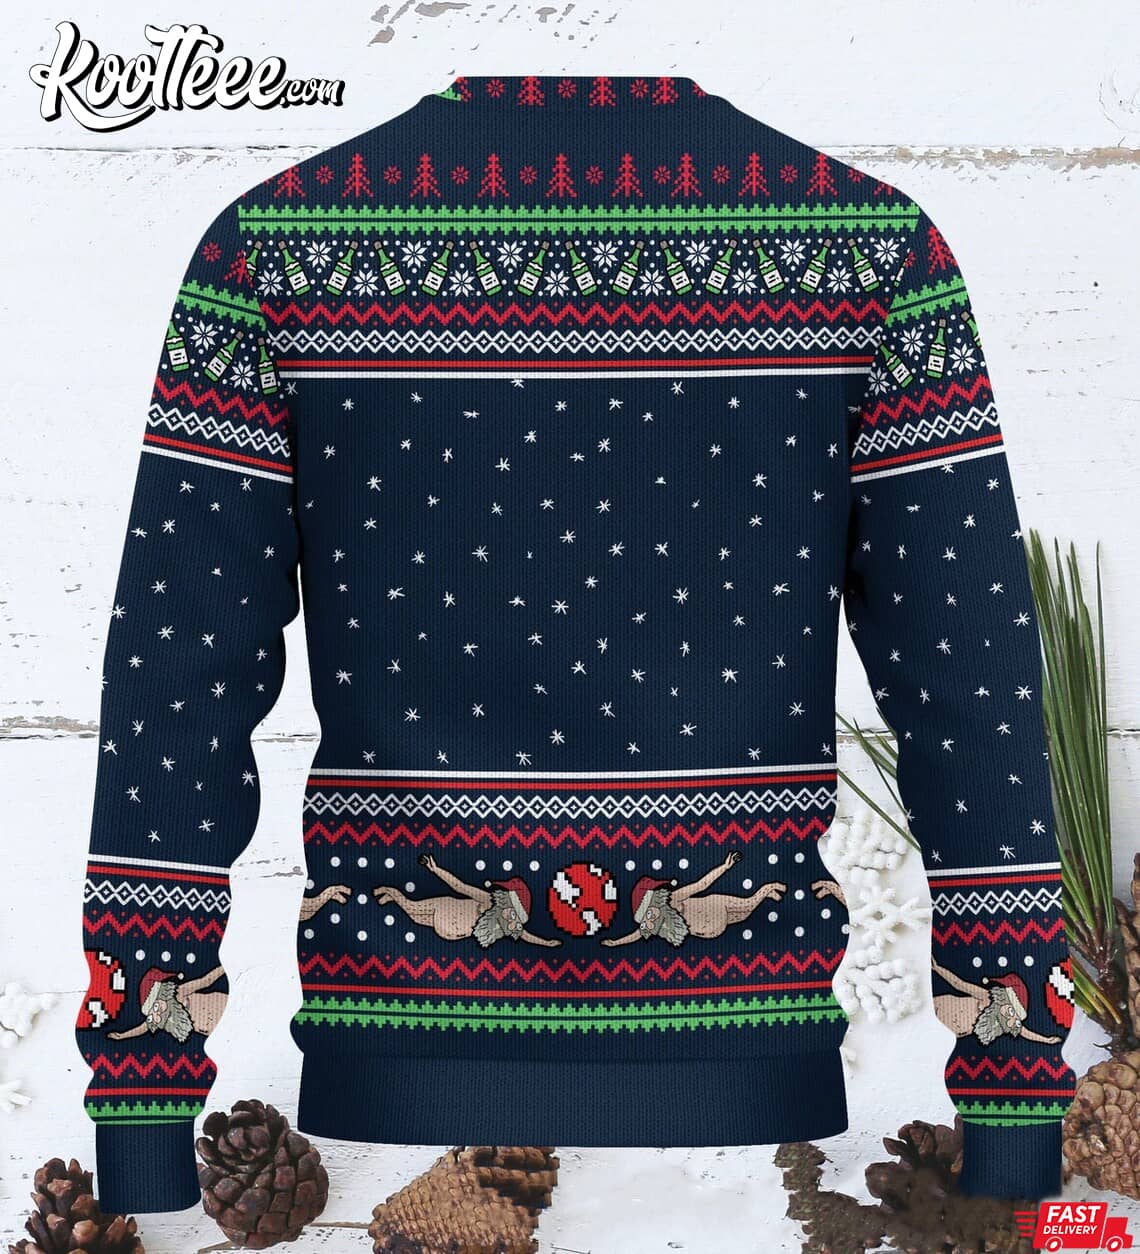 Rick And Morty Merry Wuba Labba Ugly Sweater